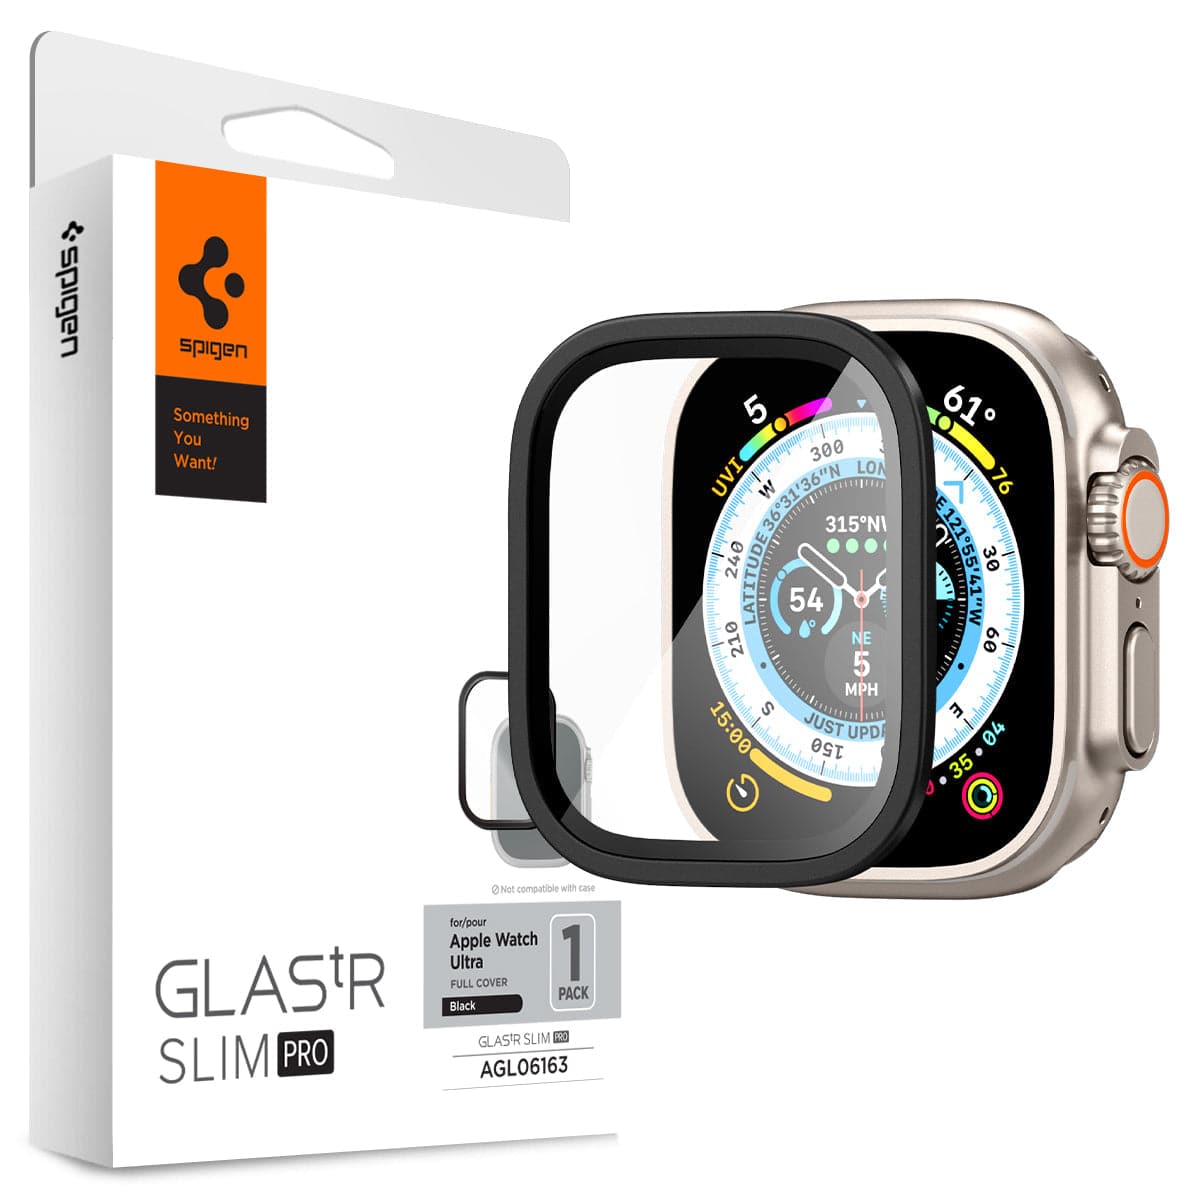 AGL06163 - Apple Watch Ultra (Apple Watch (49mm)) Screen Protector Glas.tR Slim Pro in black showing the watch face, screen protector and packaging